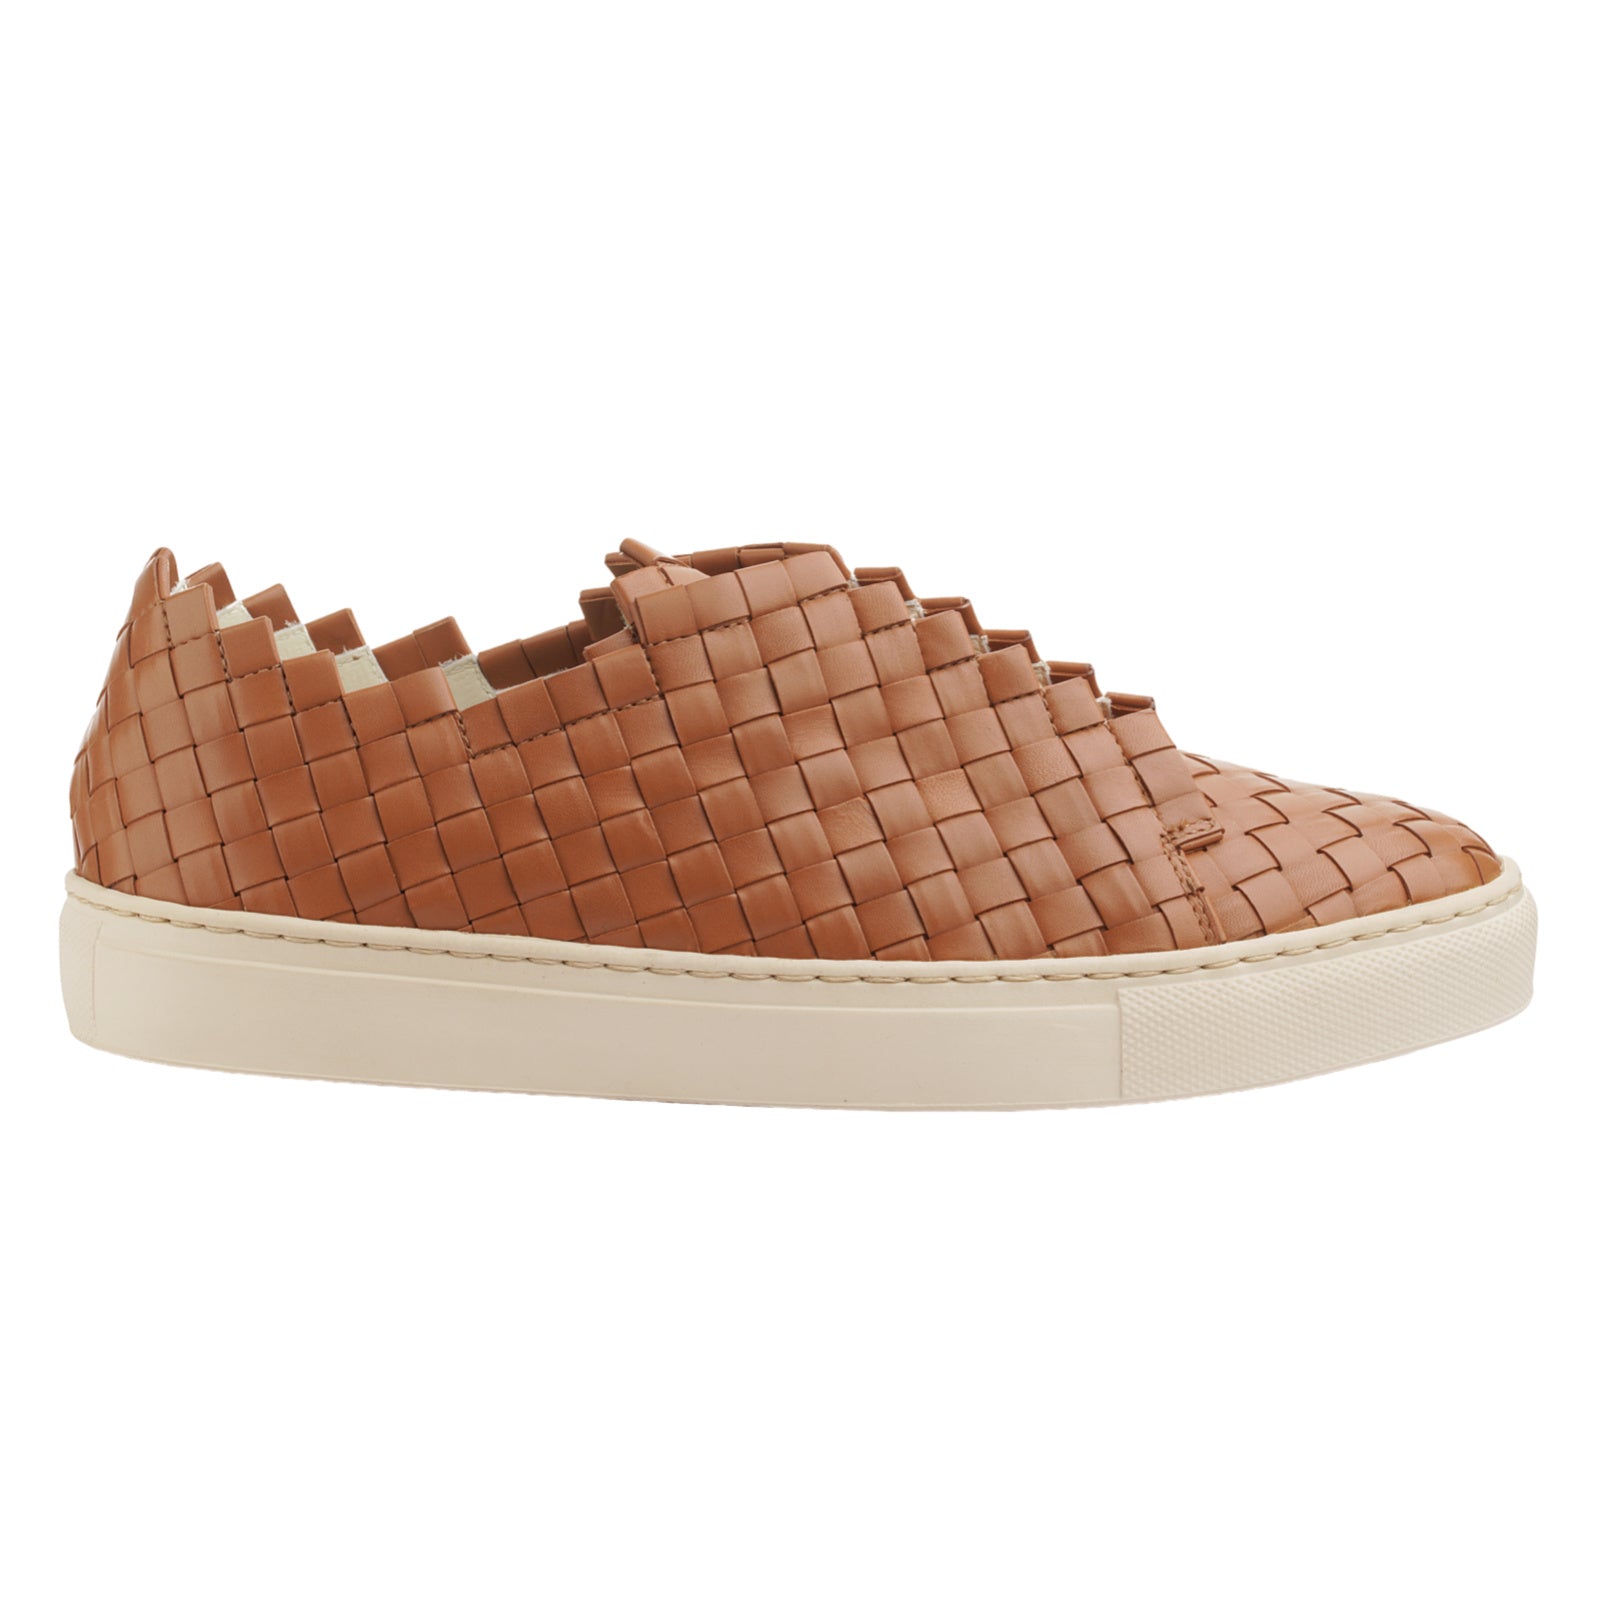 The Woven Sneaker, Woven Sneakers Womens - MILANER